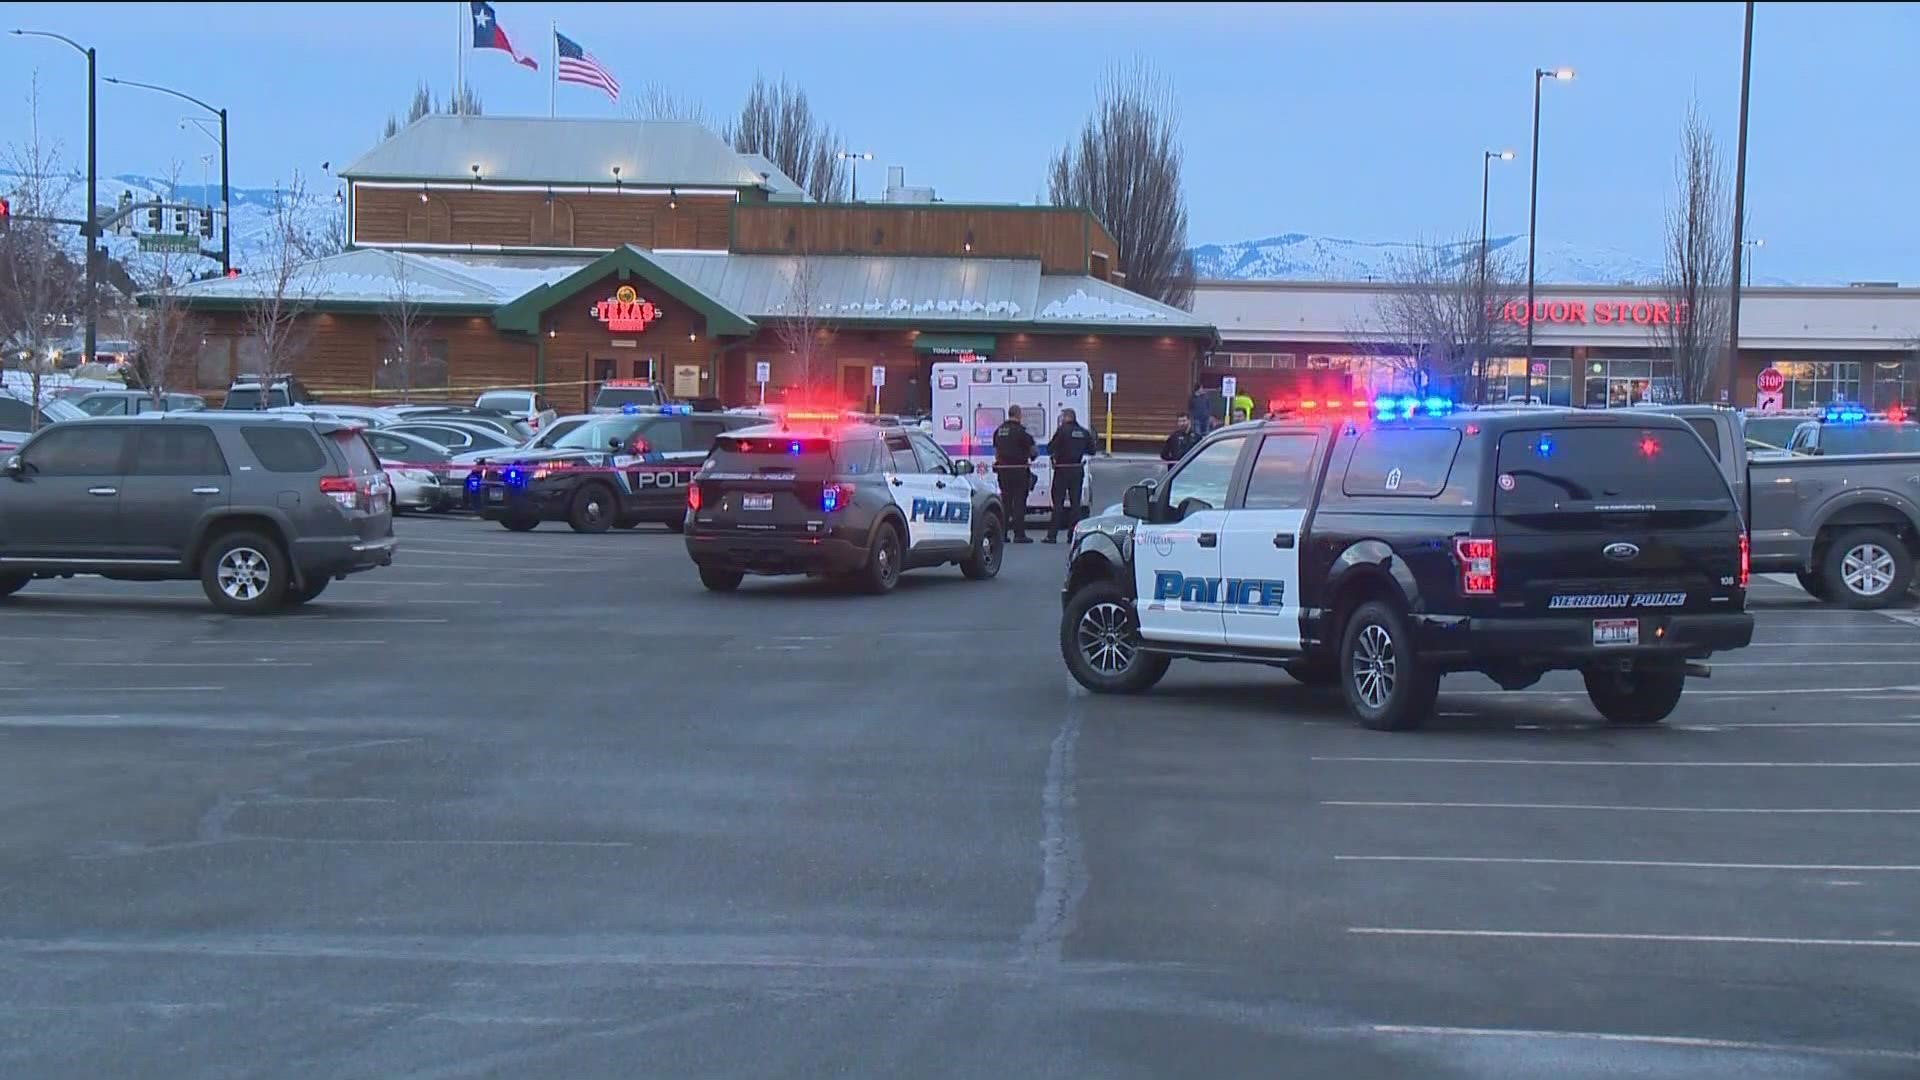 A Boise Police spokesperson said that the officer works in a unit that is often assigned to investigate or search for dangerous suspects and fugitives.